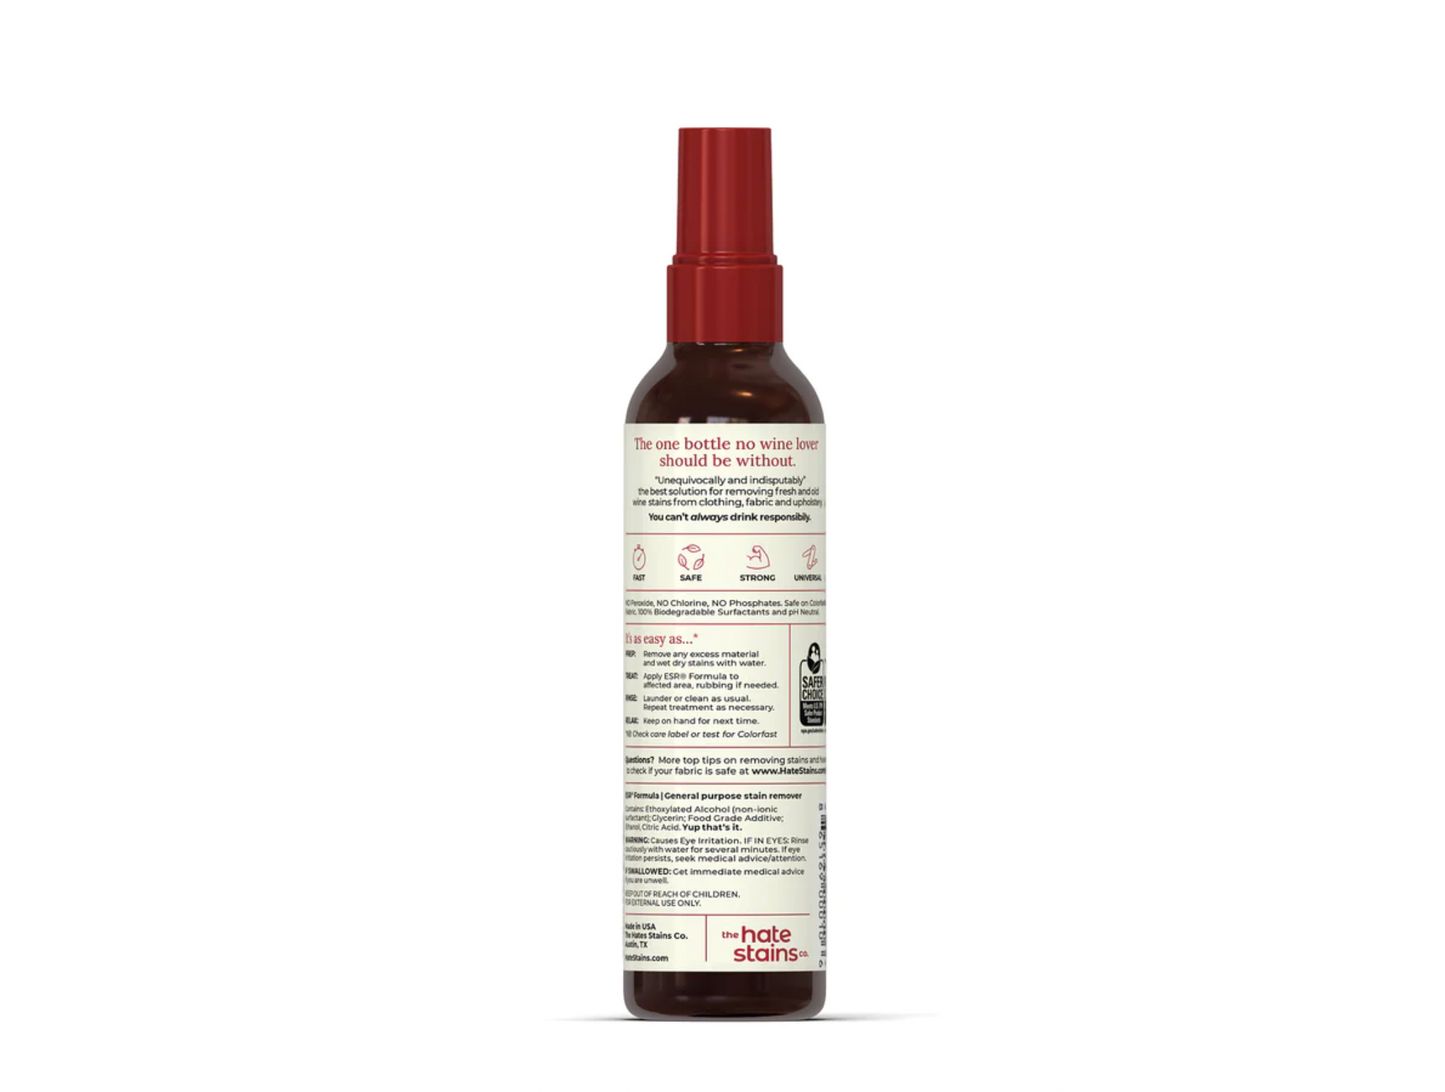 Chateau Spill Red Wine Stain Remover